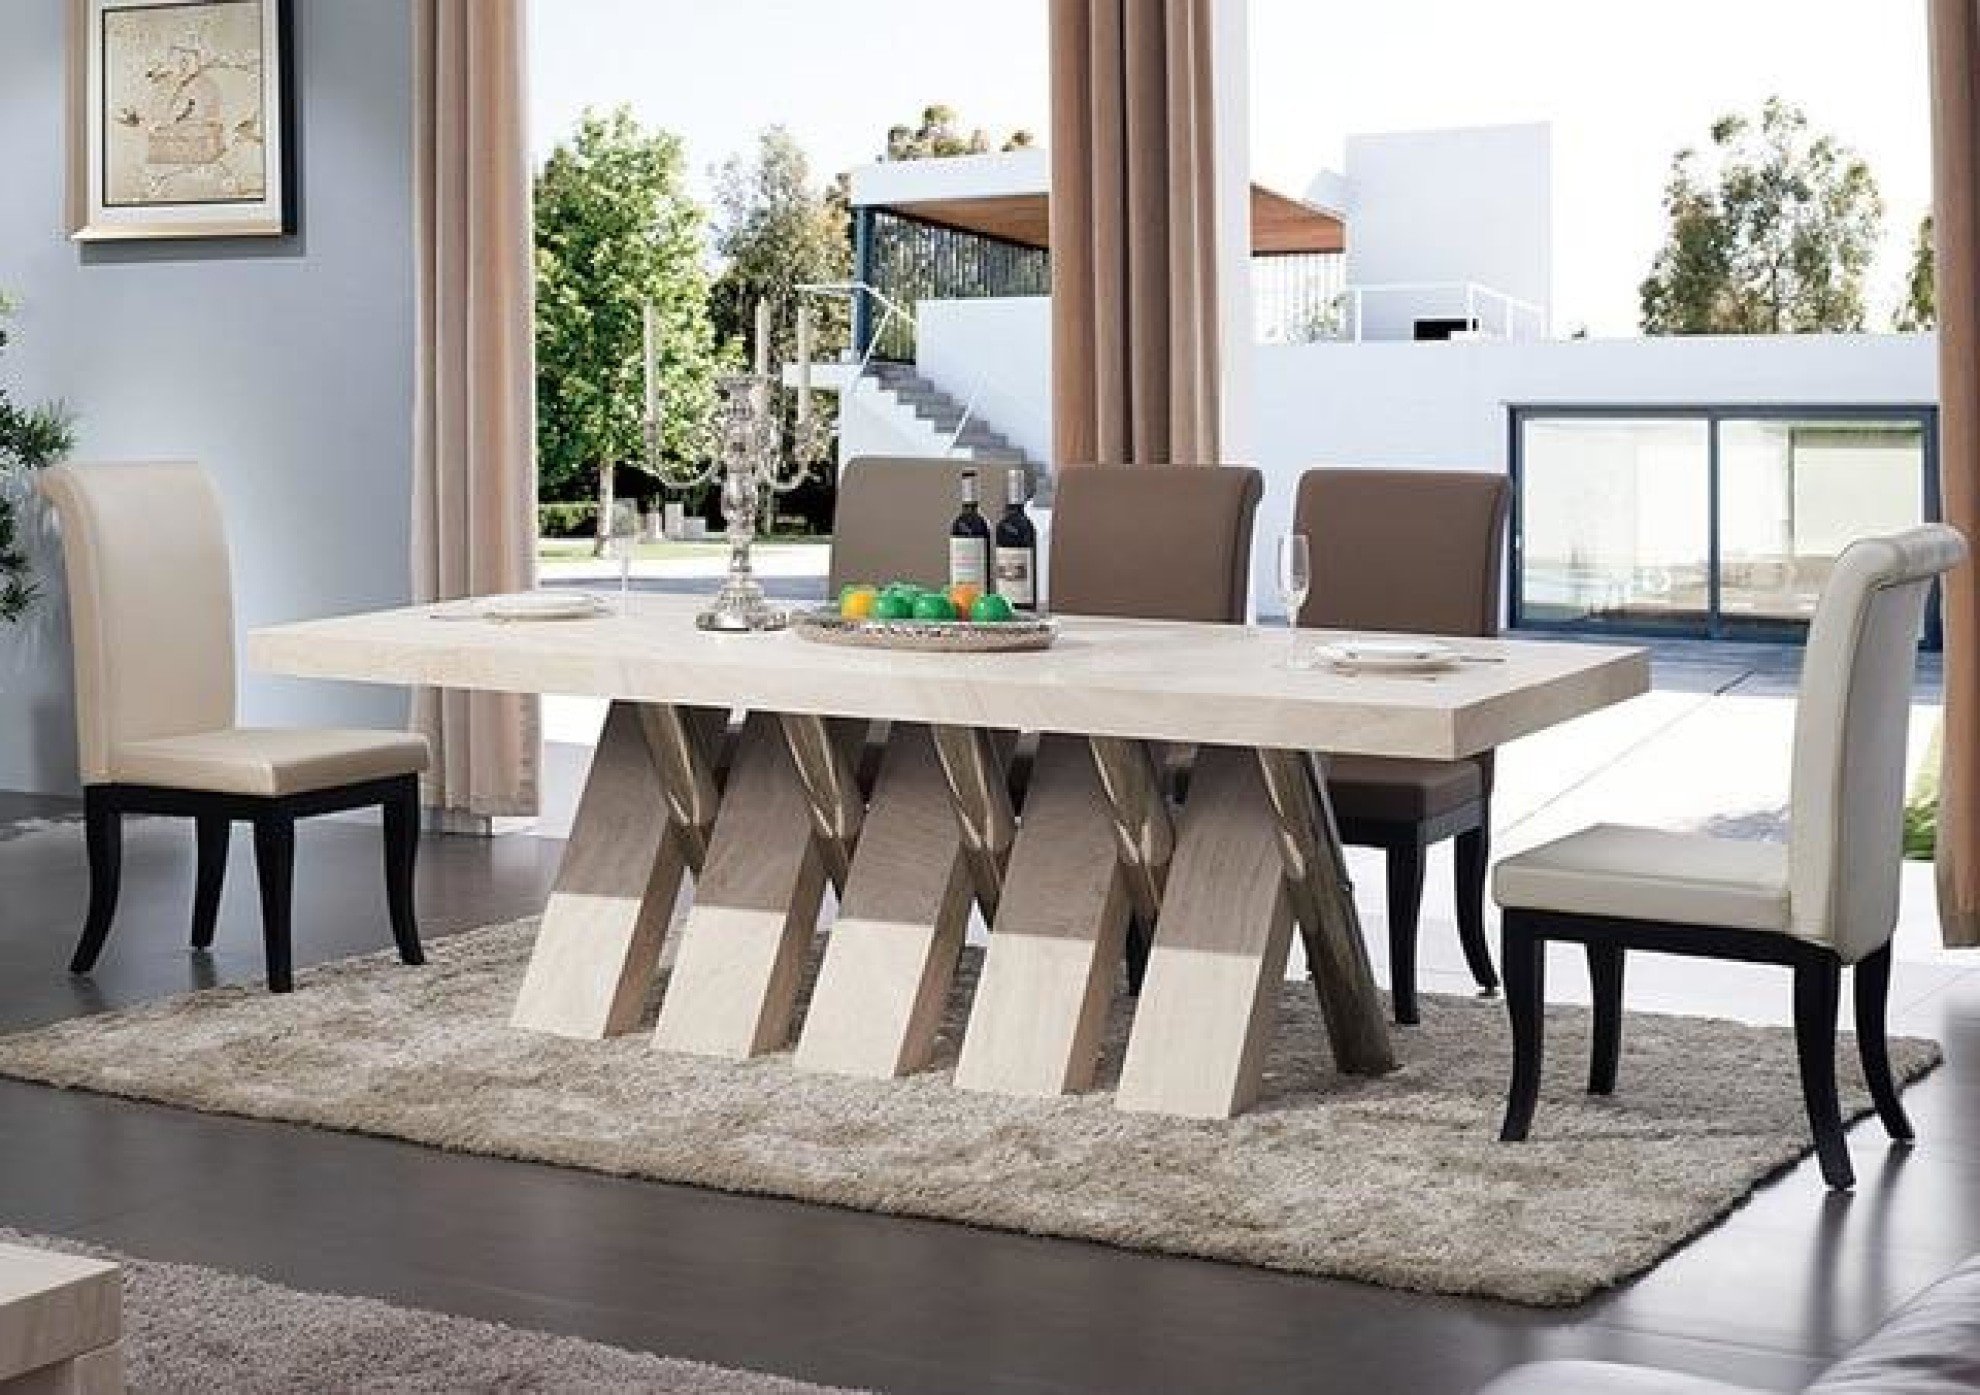 Contemporary dining table sets for the new home